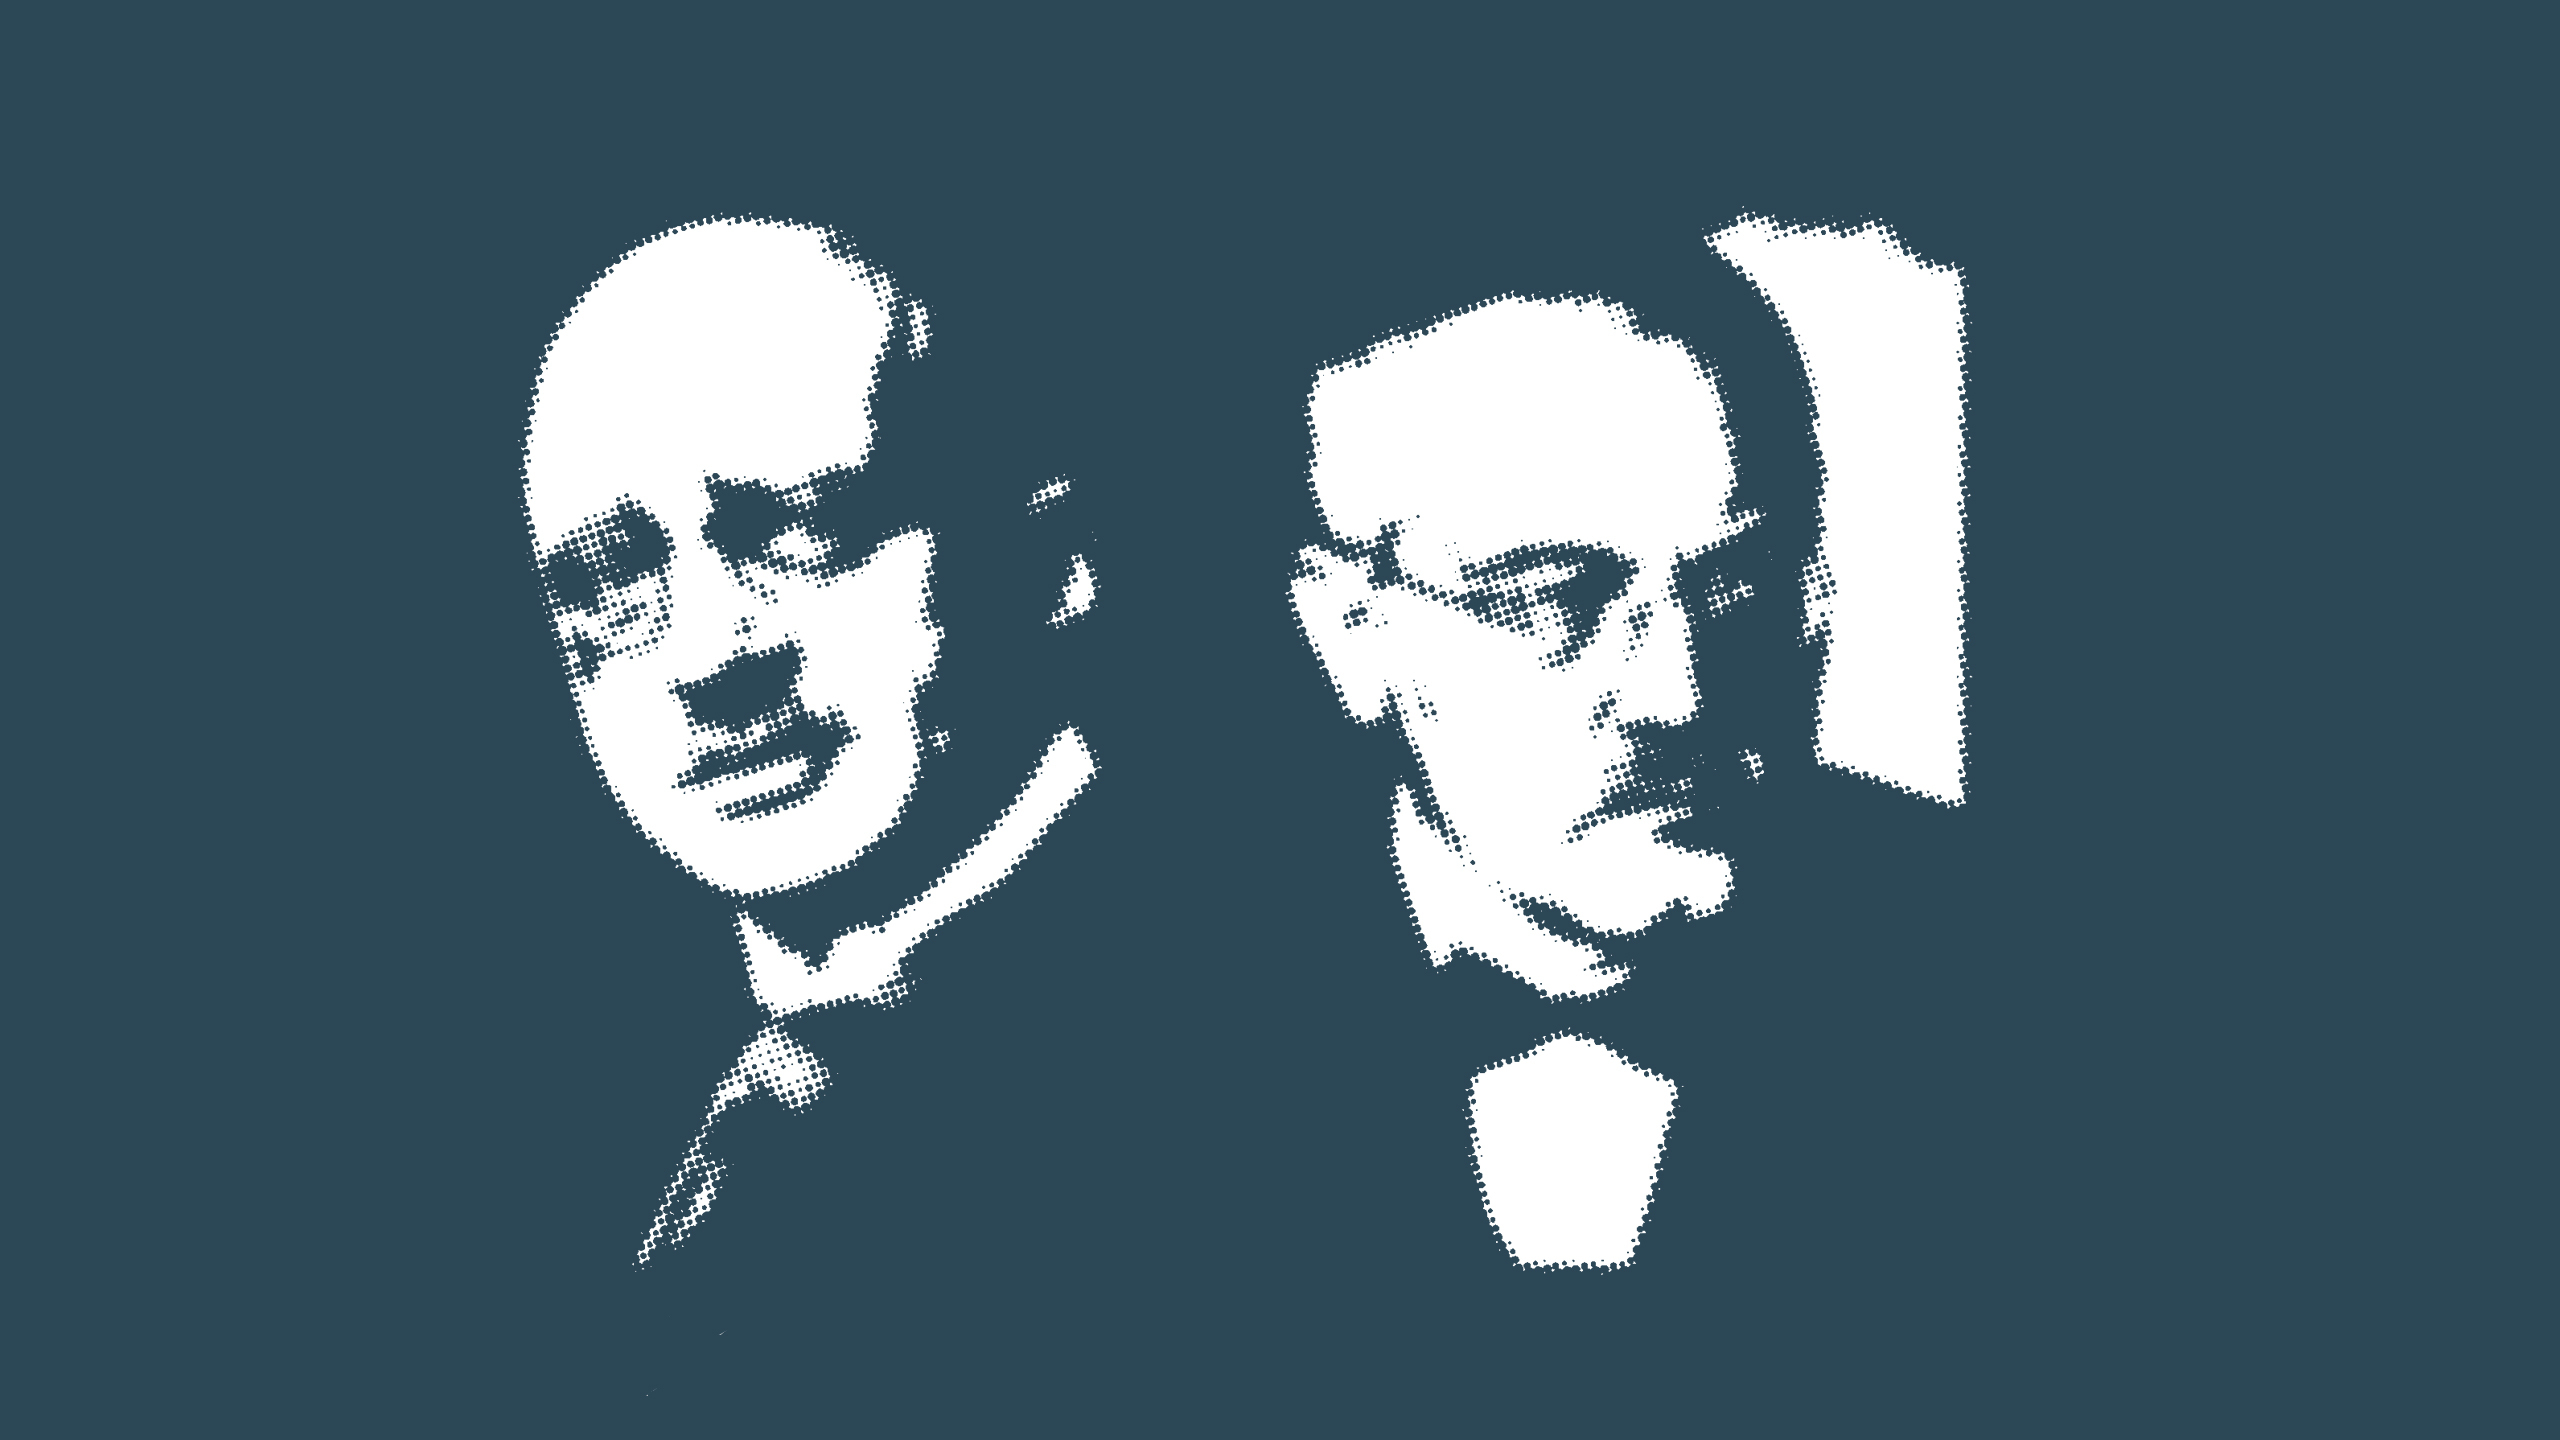 Picture of famous chemists Fritz Haber and Carl Bosch